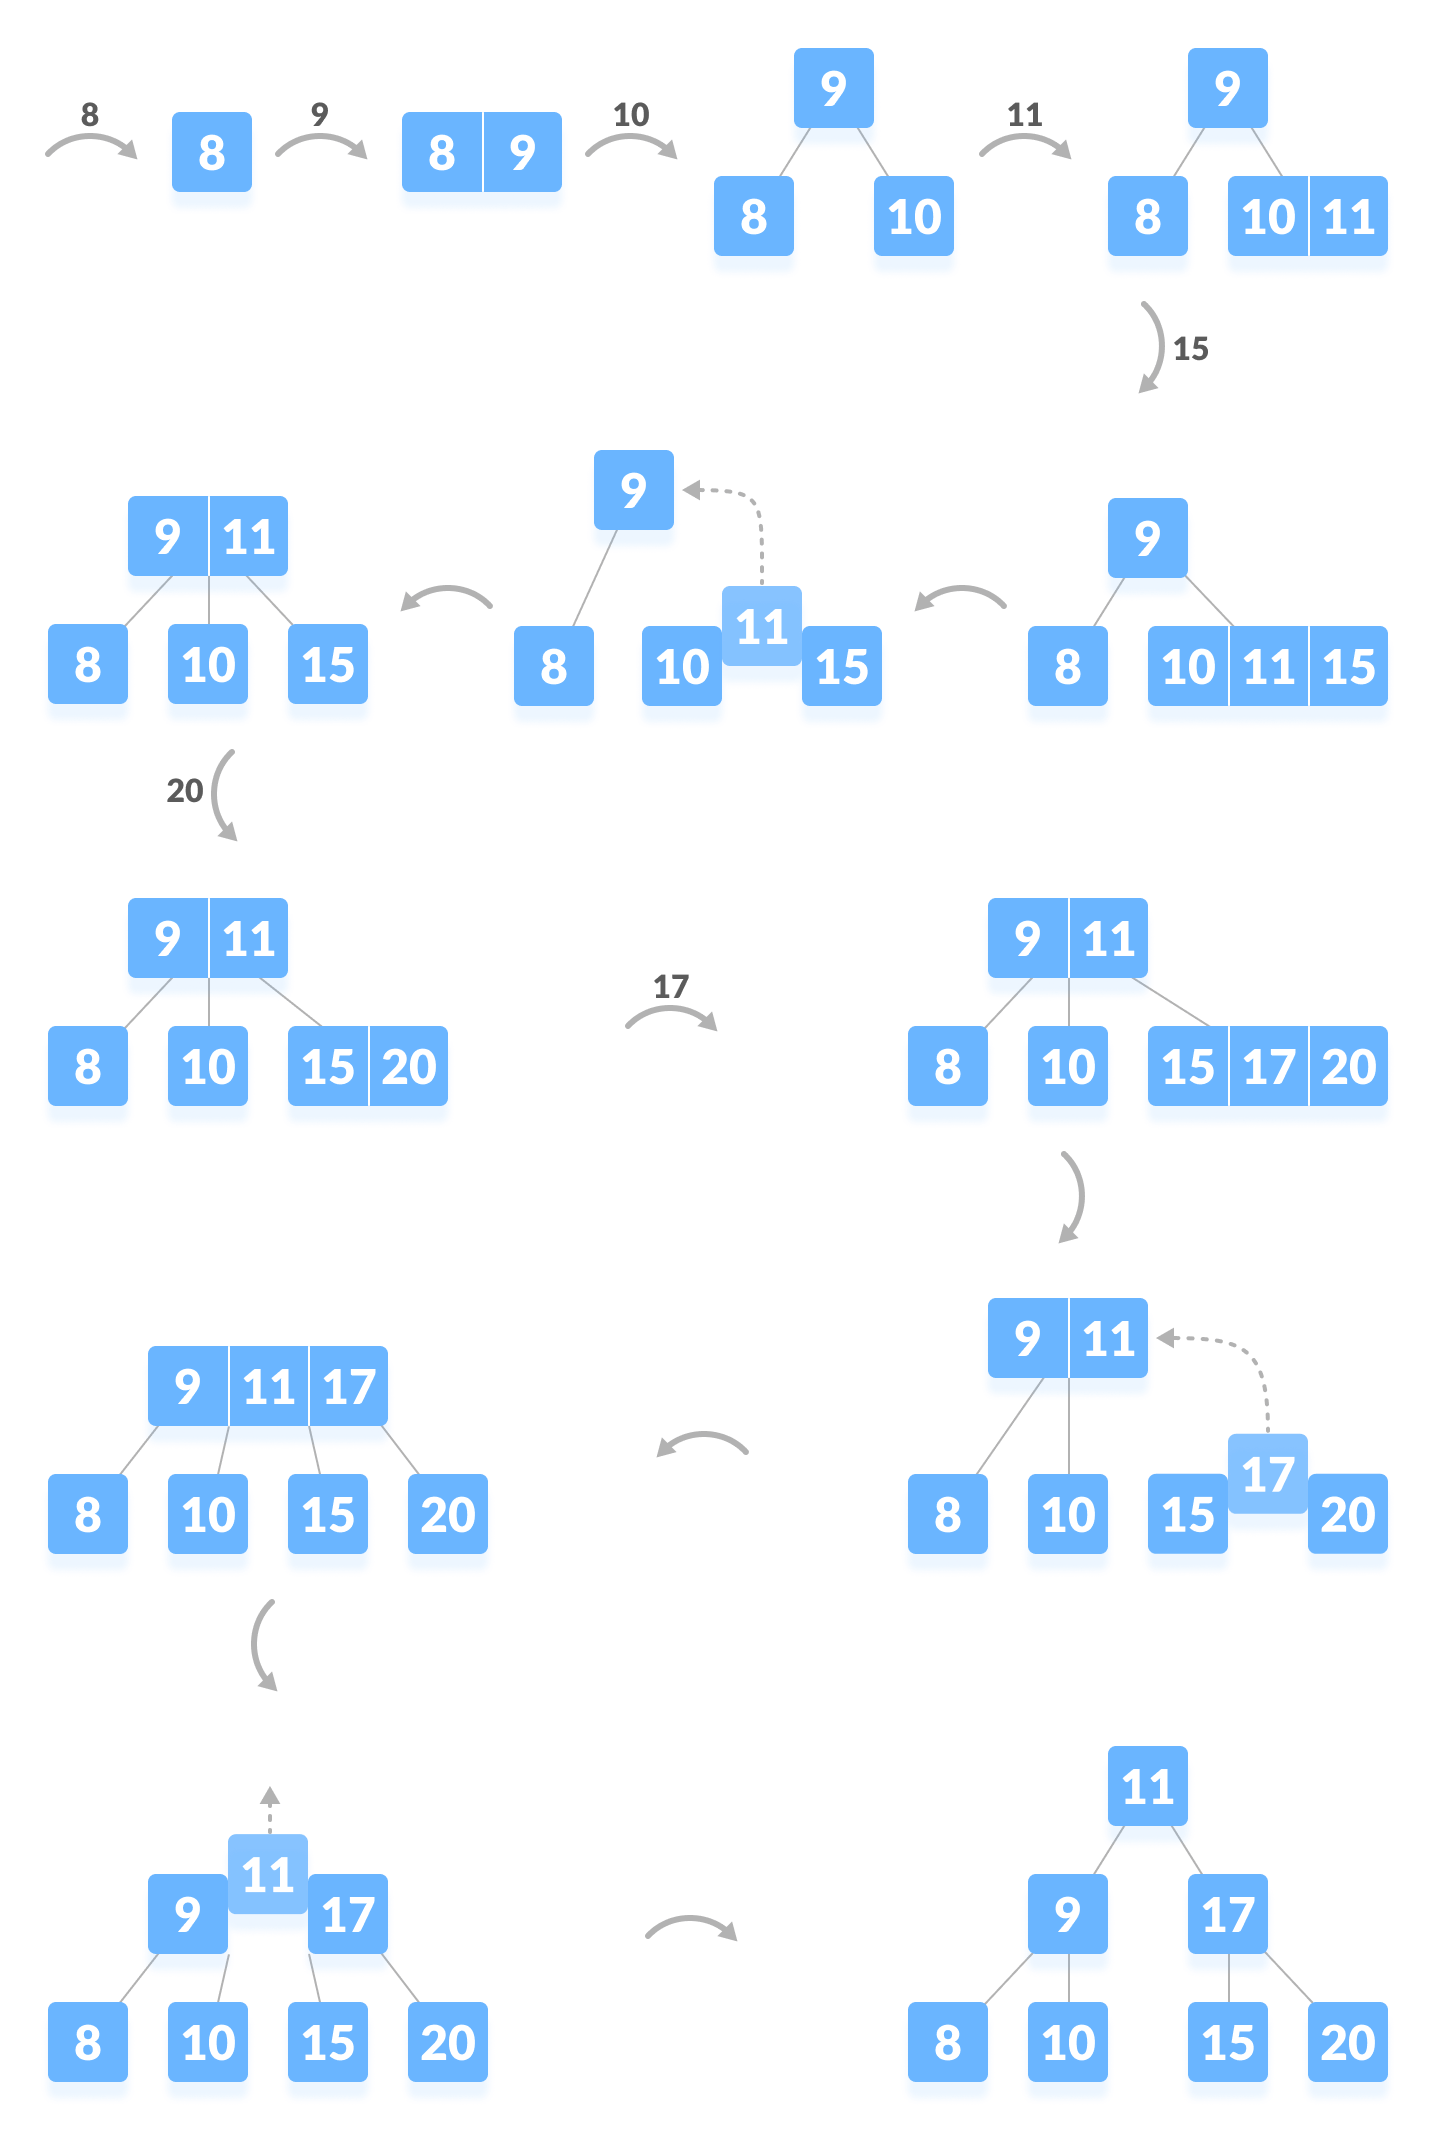 Inserting elements into a B-tree